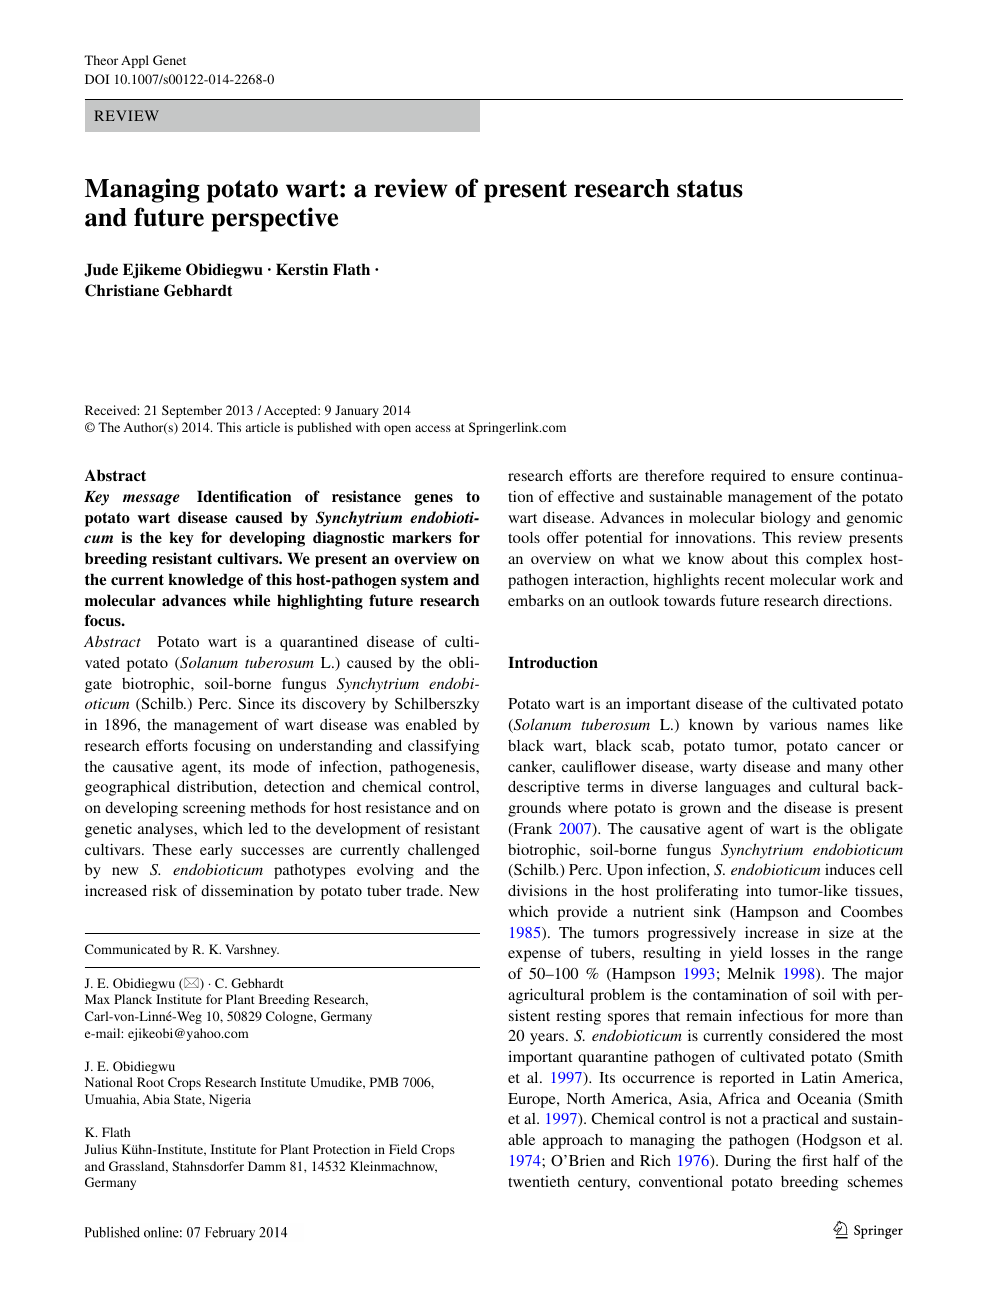 Managing Potato Wart A Review Of Present Research Status And